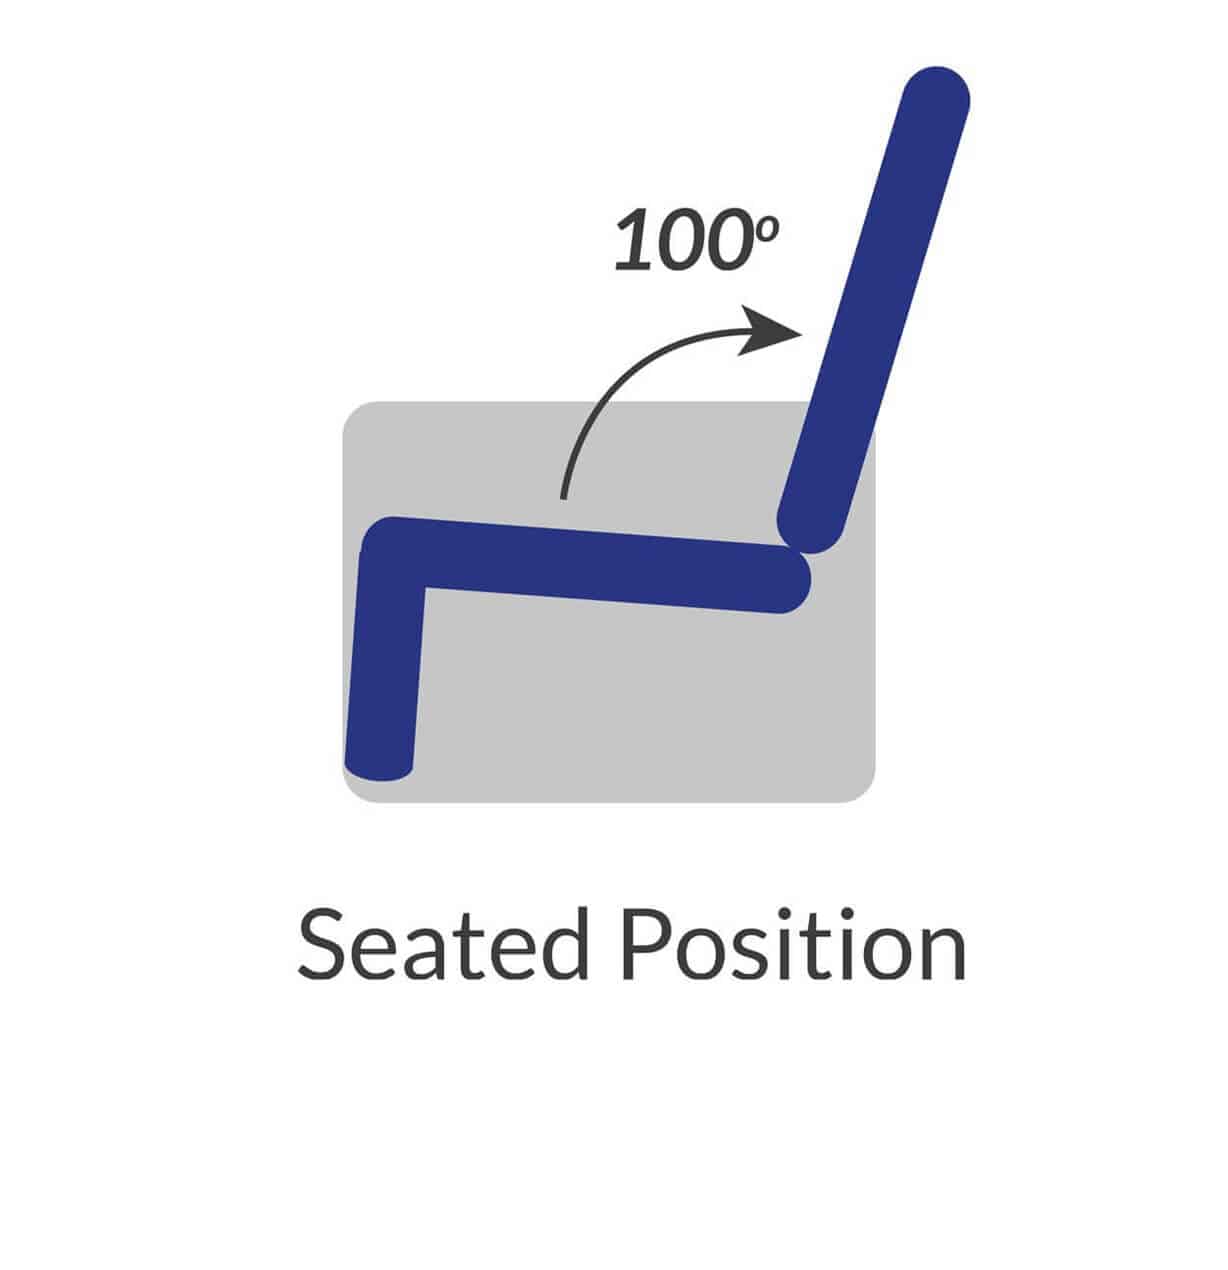 Chair in a standard seated position.